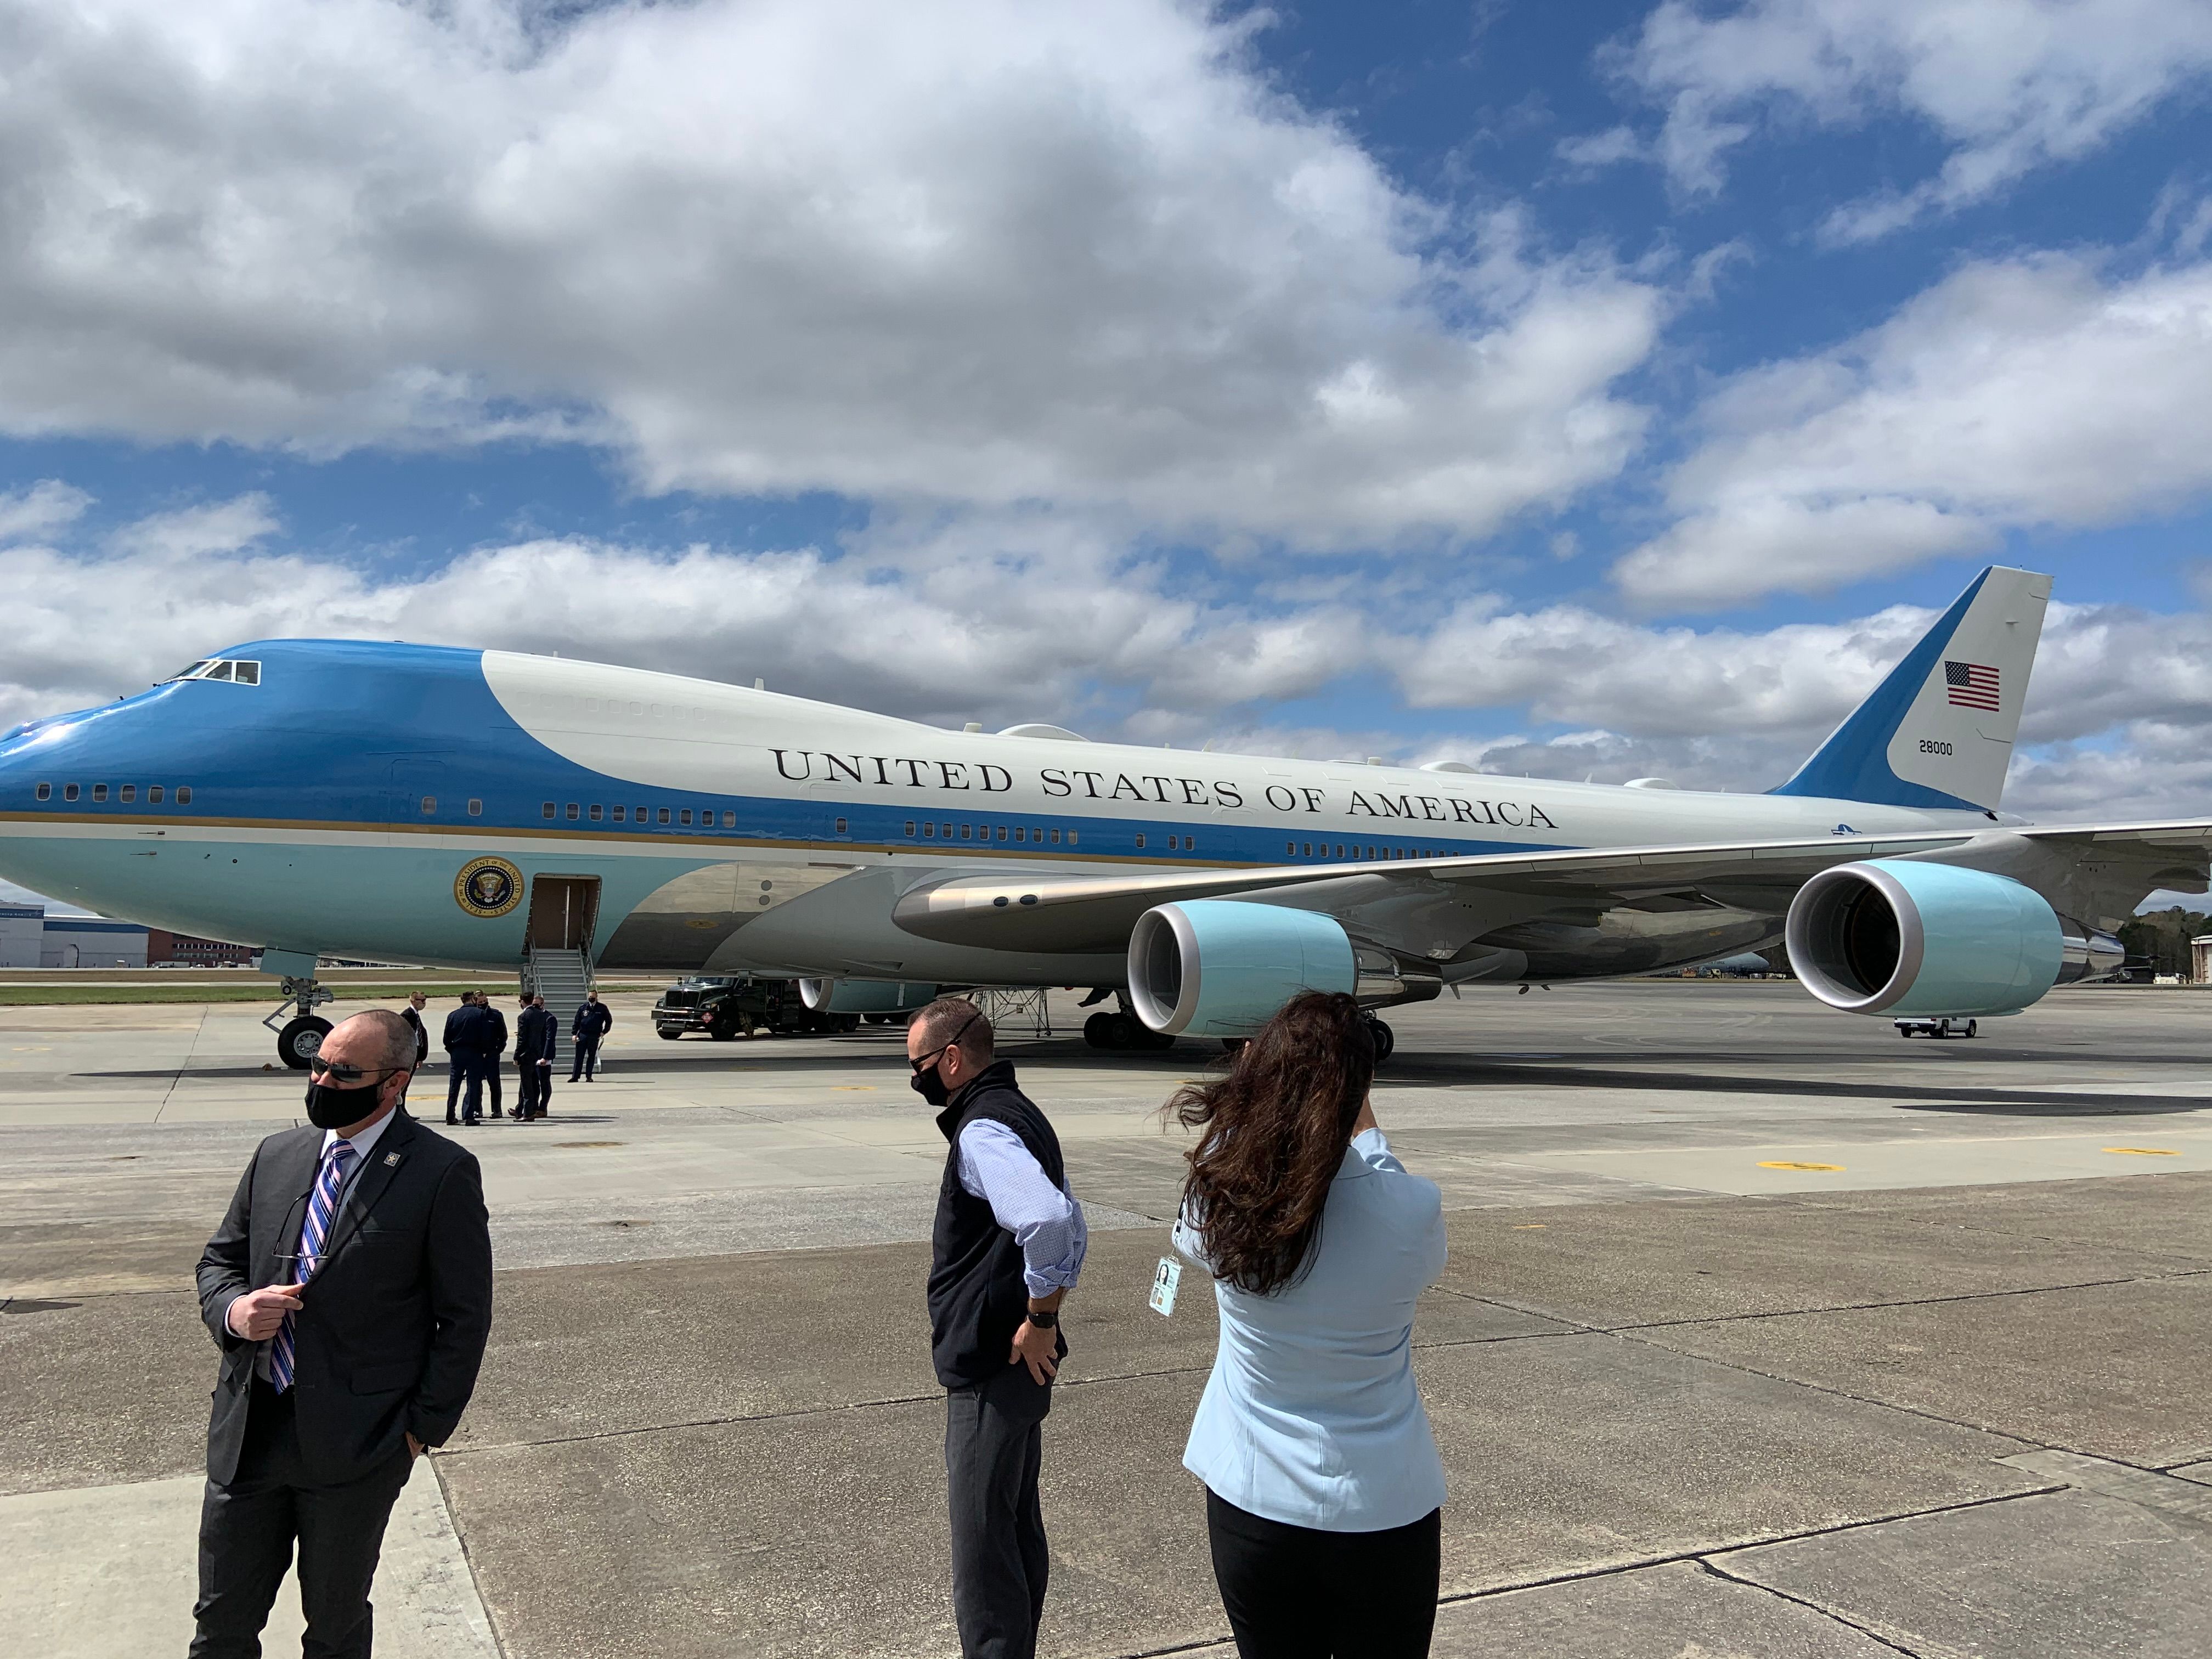 Air Force One at the airport